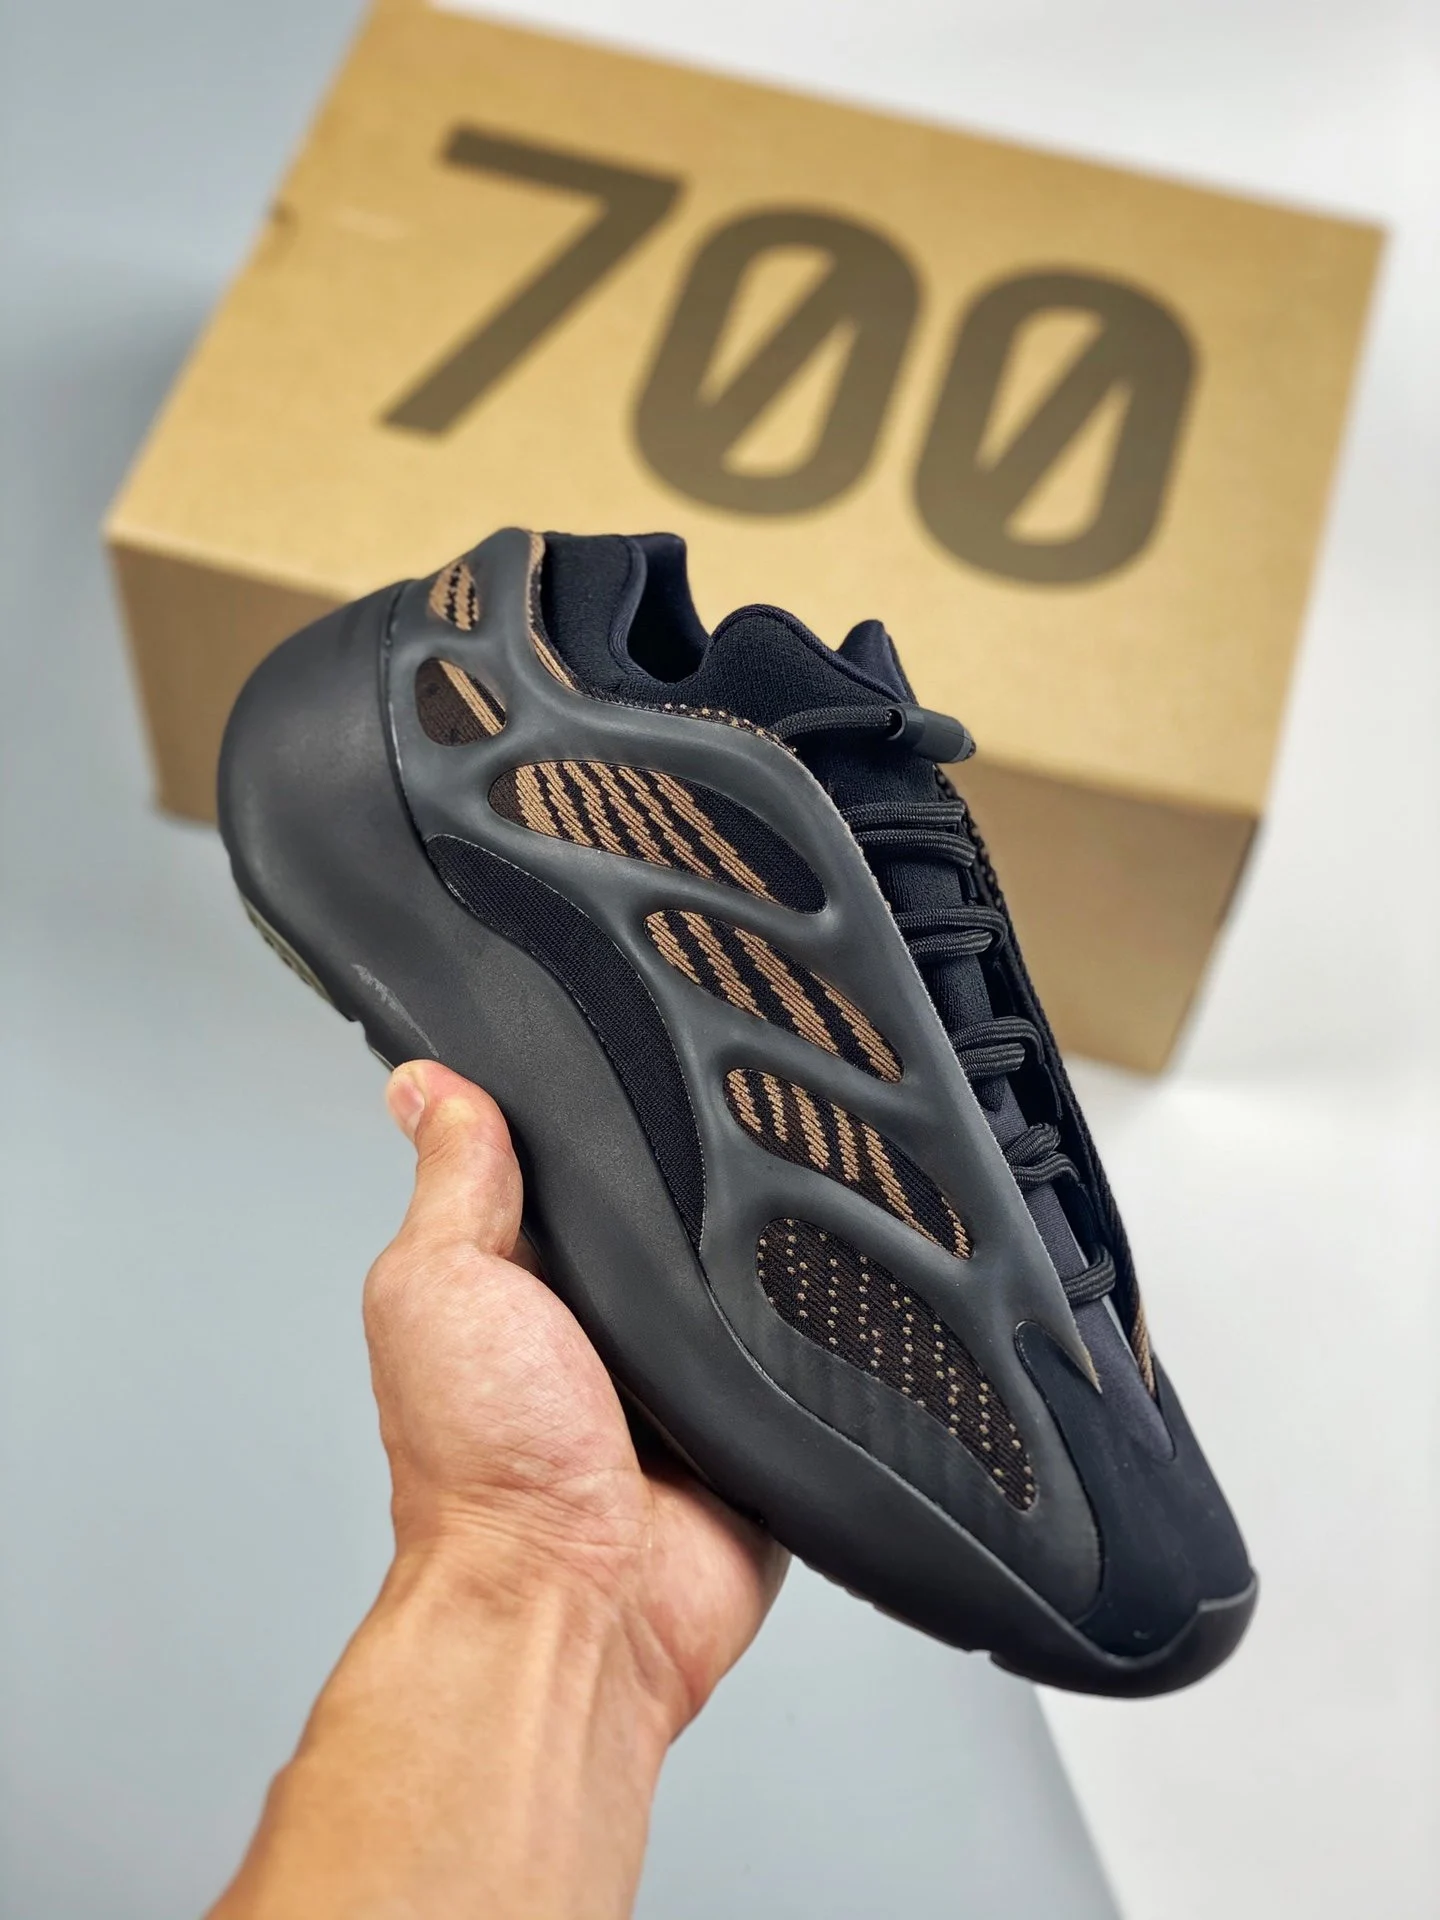 Adidas Yeezy 700 V3 Clay Brown For Sale